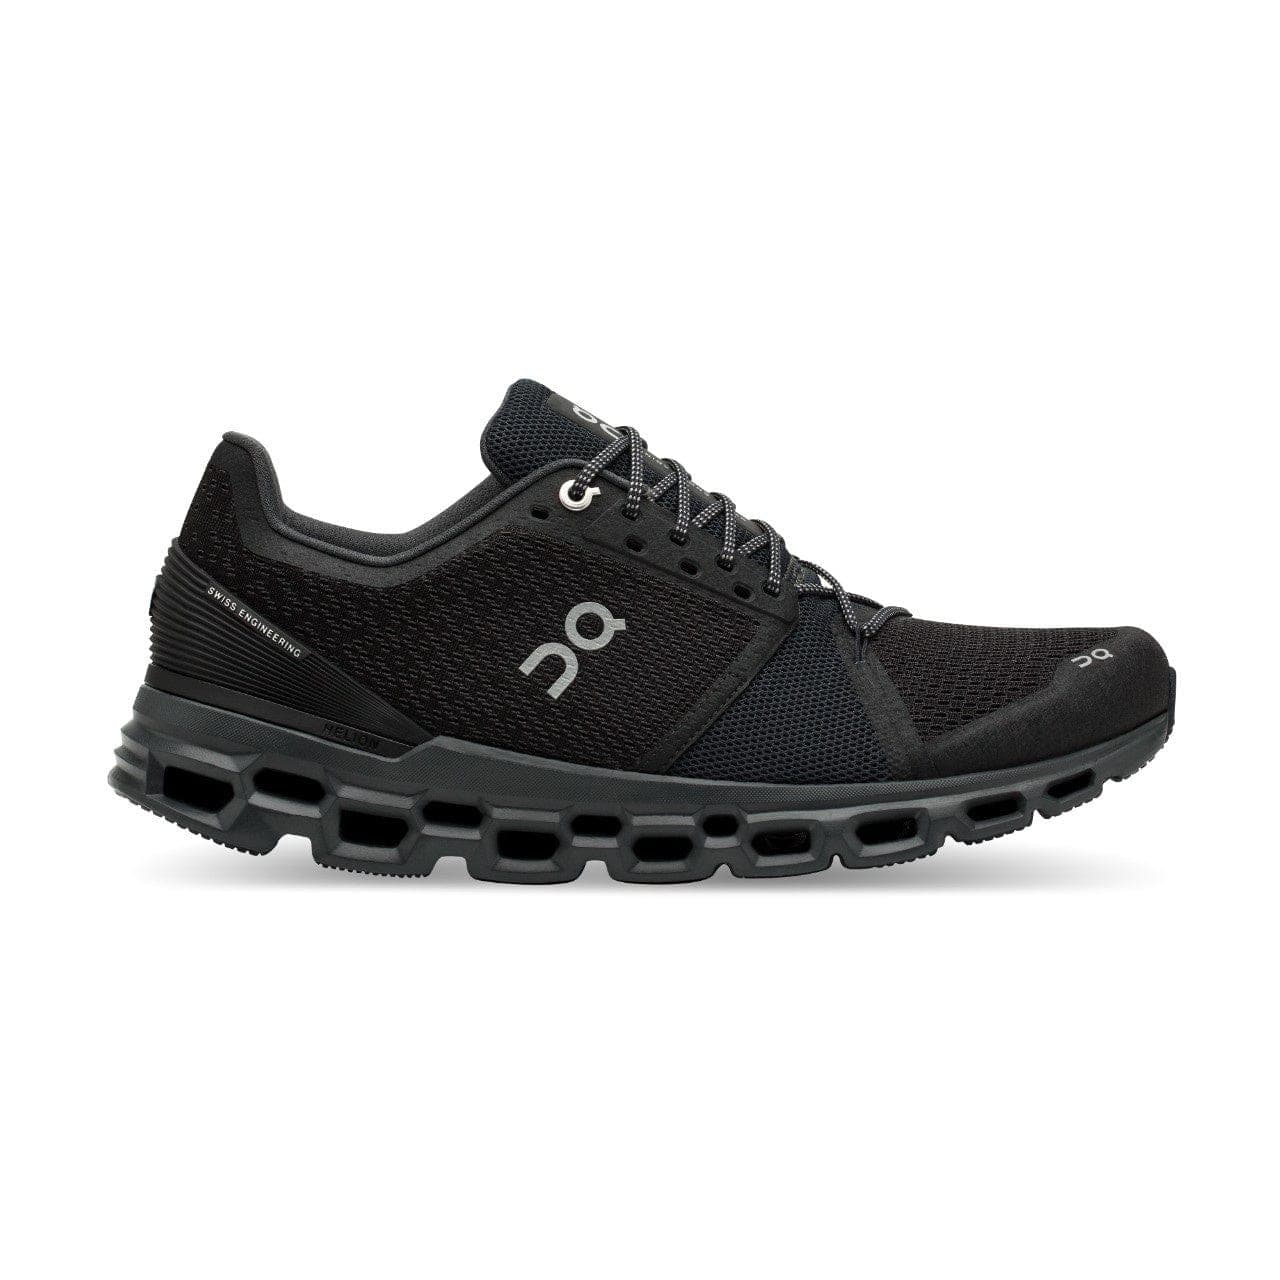 RunActive - Running shoes from Running Shops in Essex